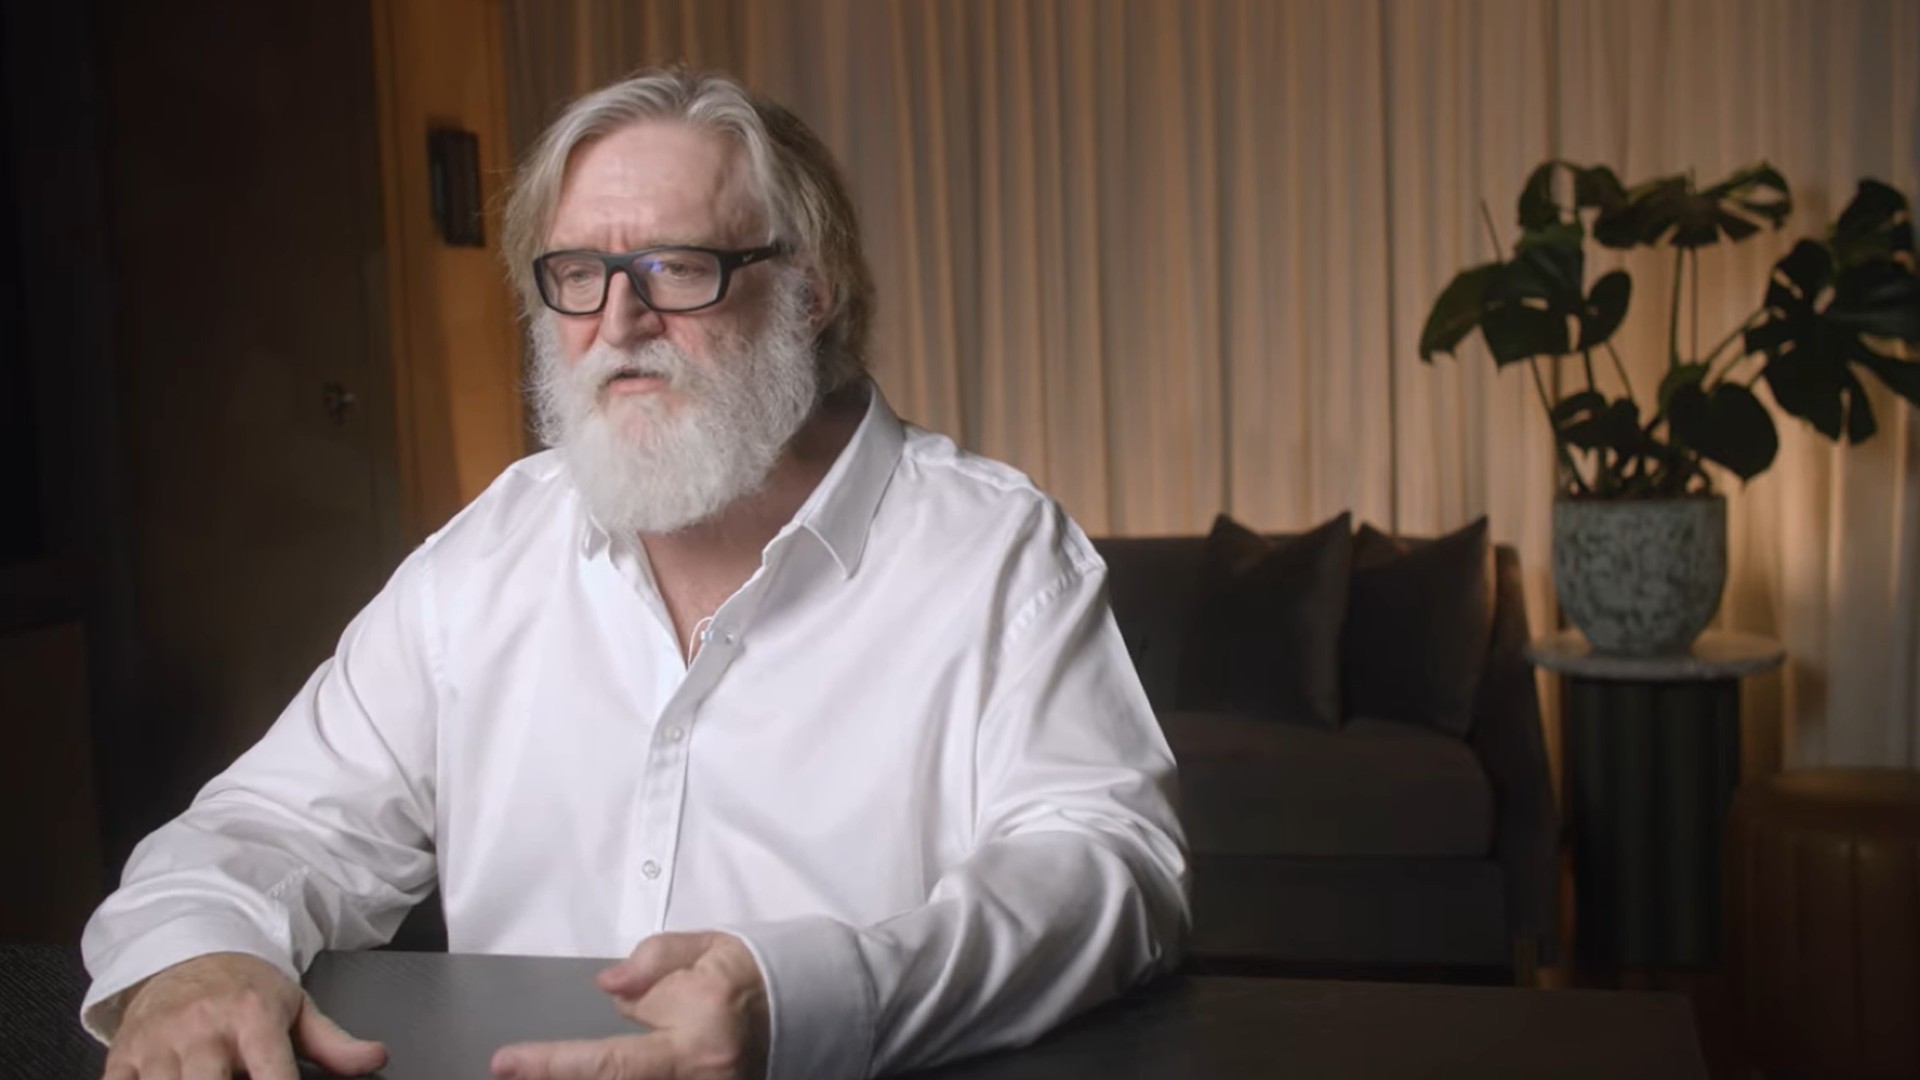 Gabe Newell's son thinks Valve needs to try something new